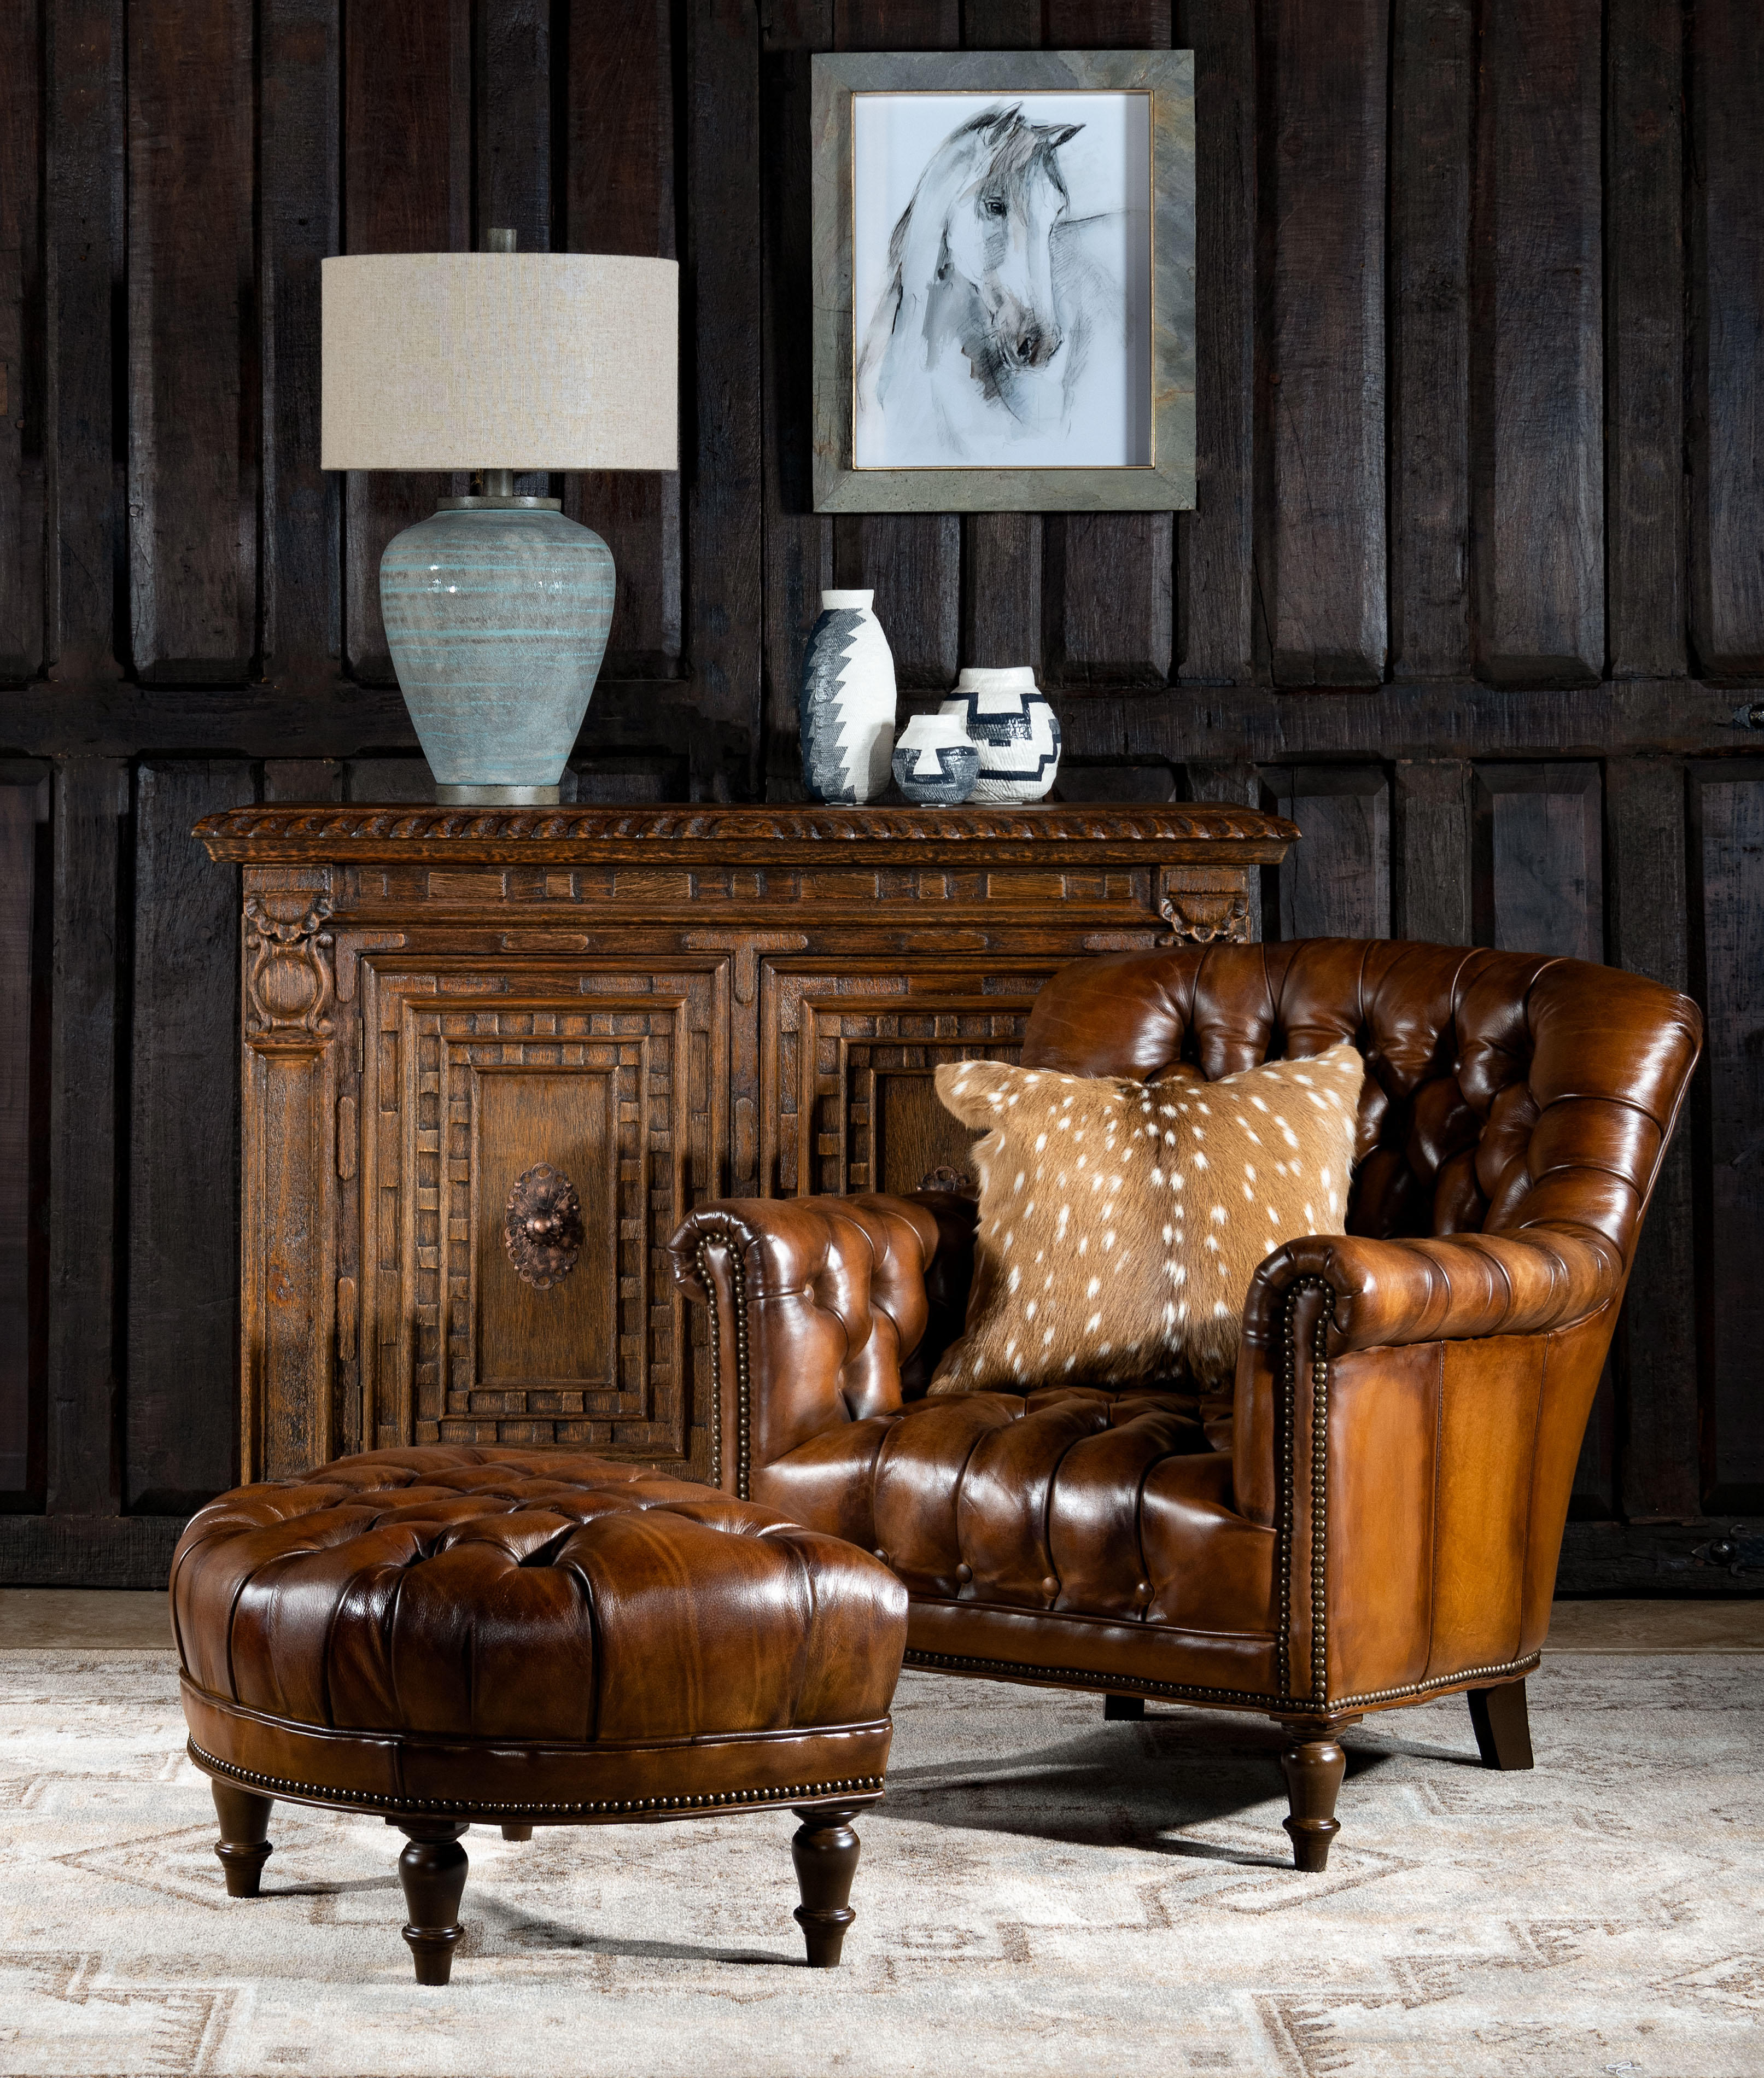 Inspired by the vintage armchairs you'll find in Victorian homes, designs like this Chesterfield-inspired leather chair fit just as well into wood-paneled libraries as they do in downtown studio apartments. Designed by artisan skilled craftsmen with a rounded back, low arms, and true brass nailhead trim, it's upholstered in top grain leather and features deep diamond tufted button accents along the inner back, arms, and seat. Our perfectly antiqued leather provides a true vintage look giving our Winchester Tufted Leather Lounge Chair a timeless appeal! 100% American Made to the highest standards of quality and craftsmanship!